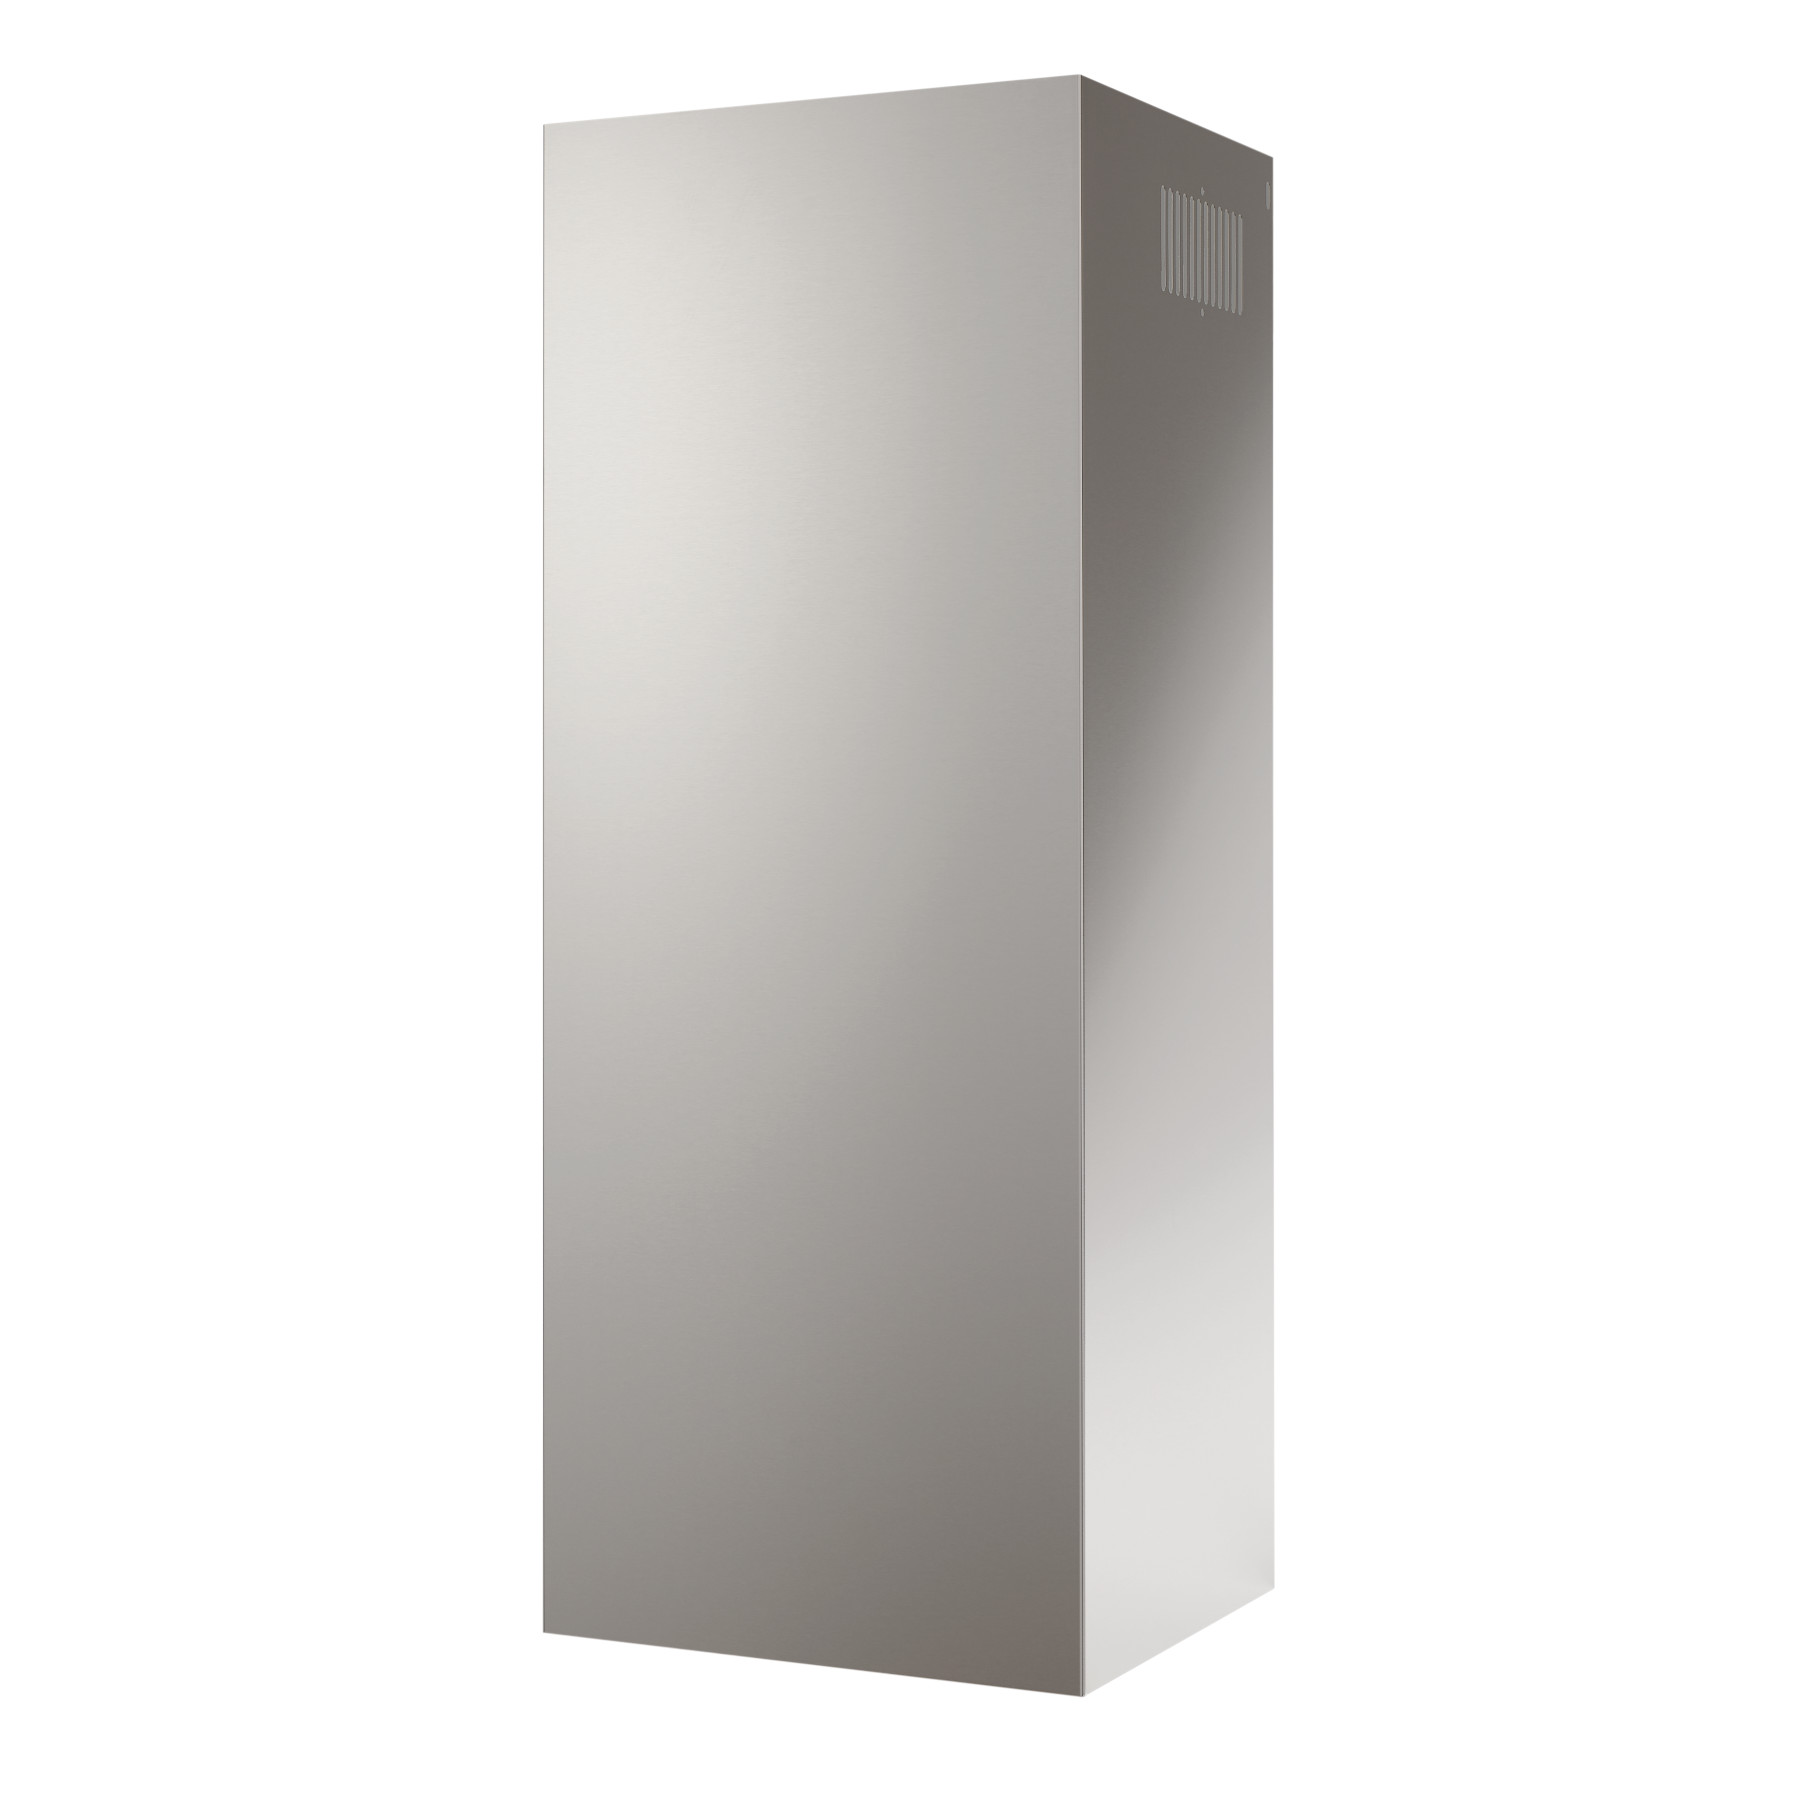 Optional ducted/non-ducted flue extension in stainless for Broan BWS series range hoods